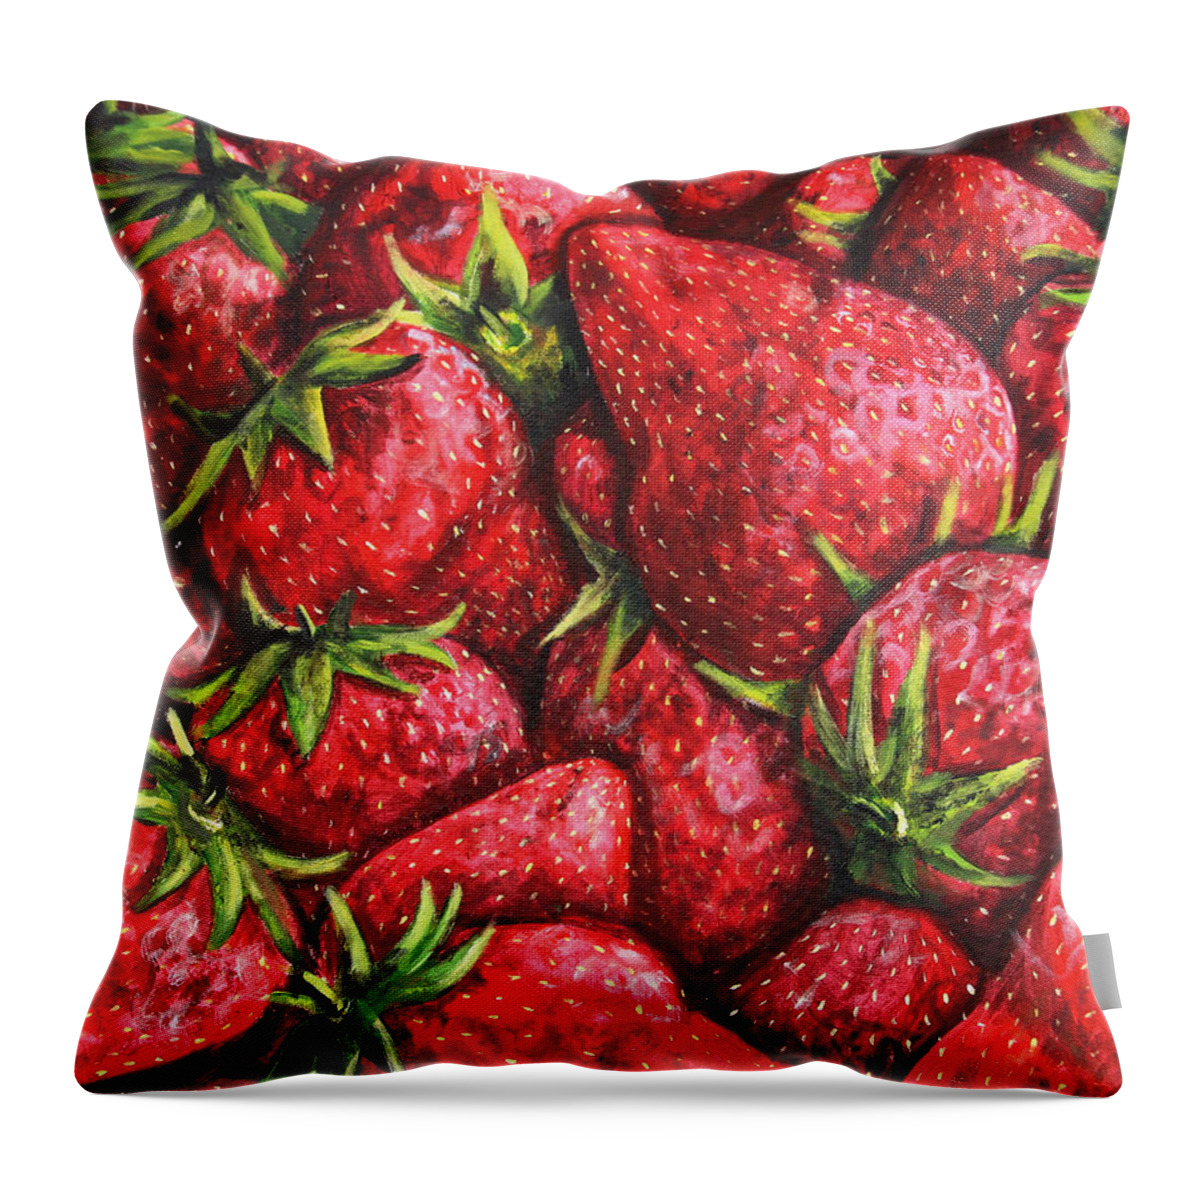 Strawberry Throw Pillow featuring the painting A Fresh Summer by Shana Rowe Jackson